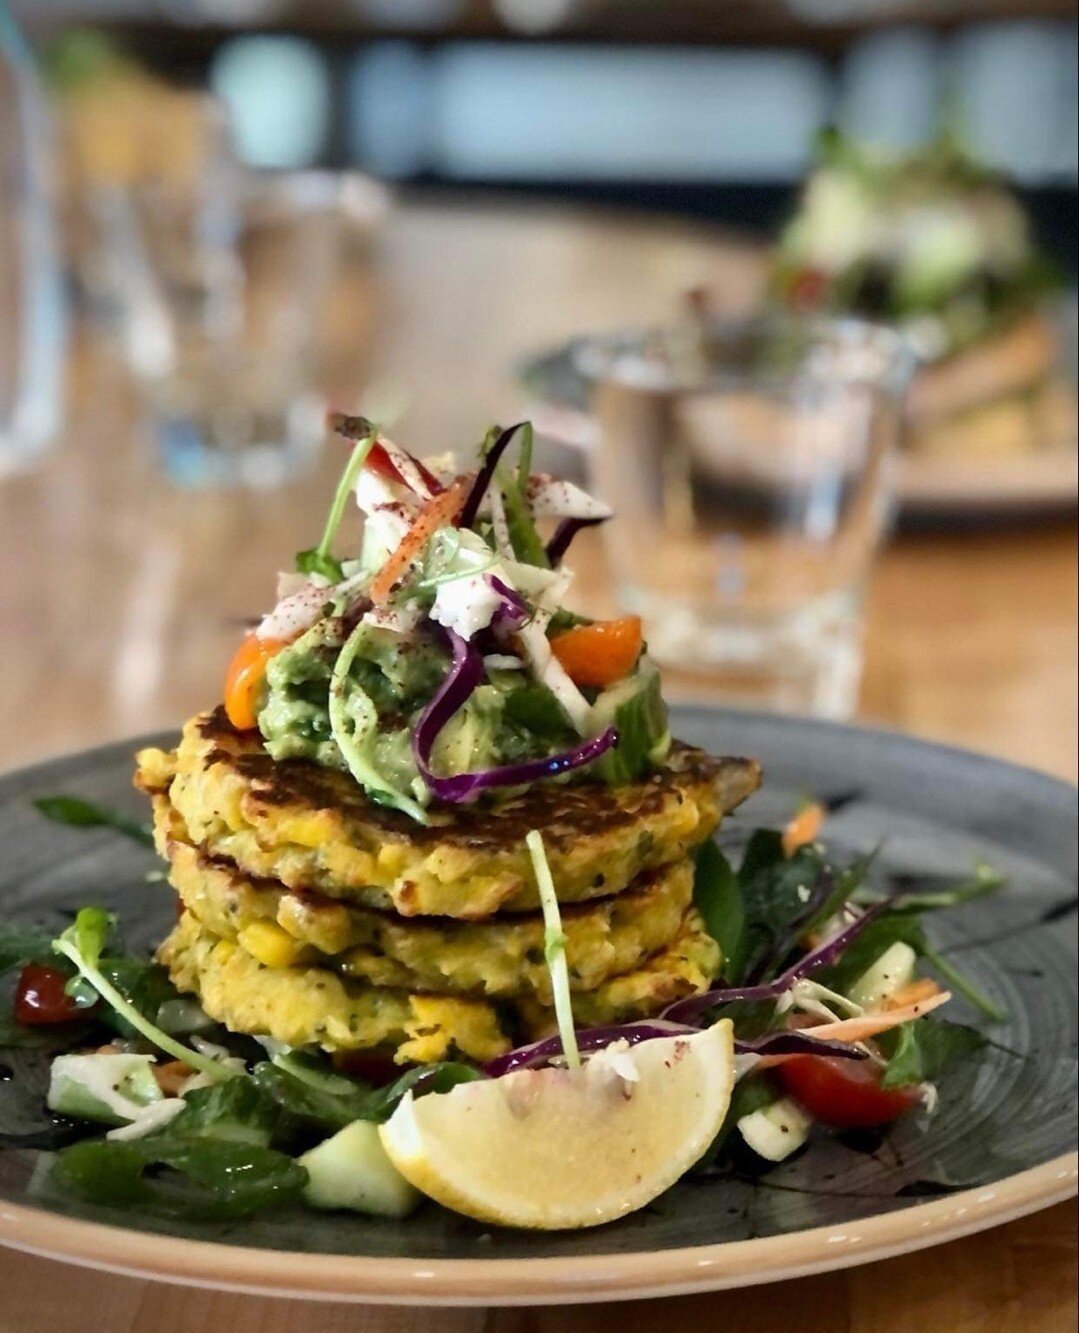 Our Corn Fritters topped with avocado, tomato salsa and housemade balsamic glaze! 🤩⁠
⁠
⁠
⁠
#extractedivanhoe #coffee #ivanhoecafe #dineinivanhoe #melbournecafe #hungry #delicious​#breakfast #healthylifestyle #supportlocal #brunchinmelbourne #foodieg